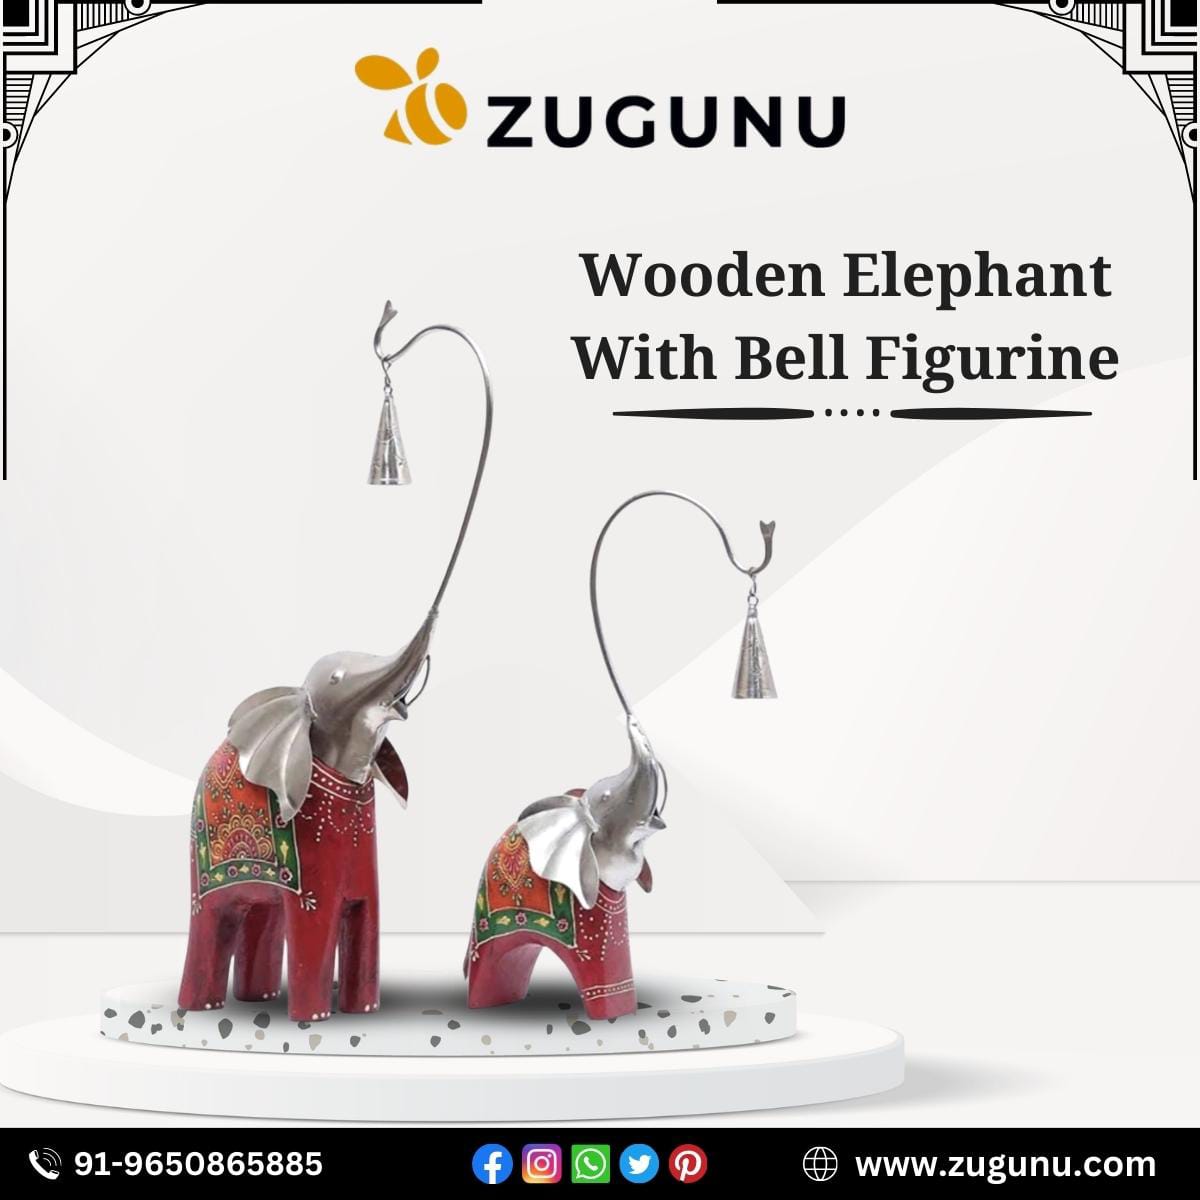 Wooden Elephant With Bell Figurine Now Available At Zugunu